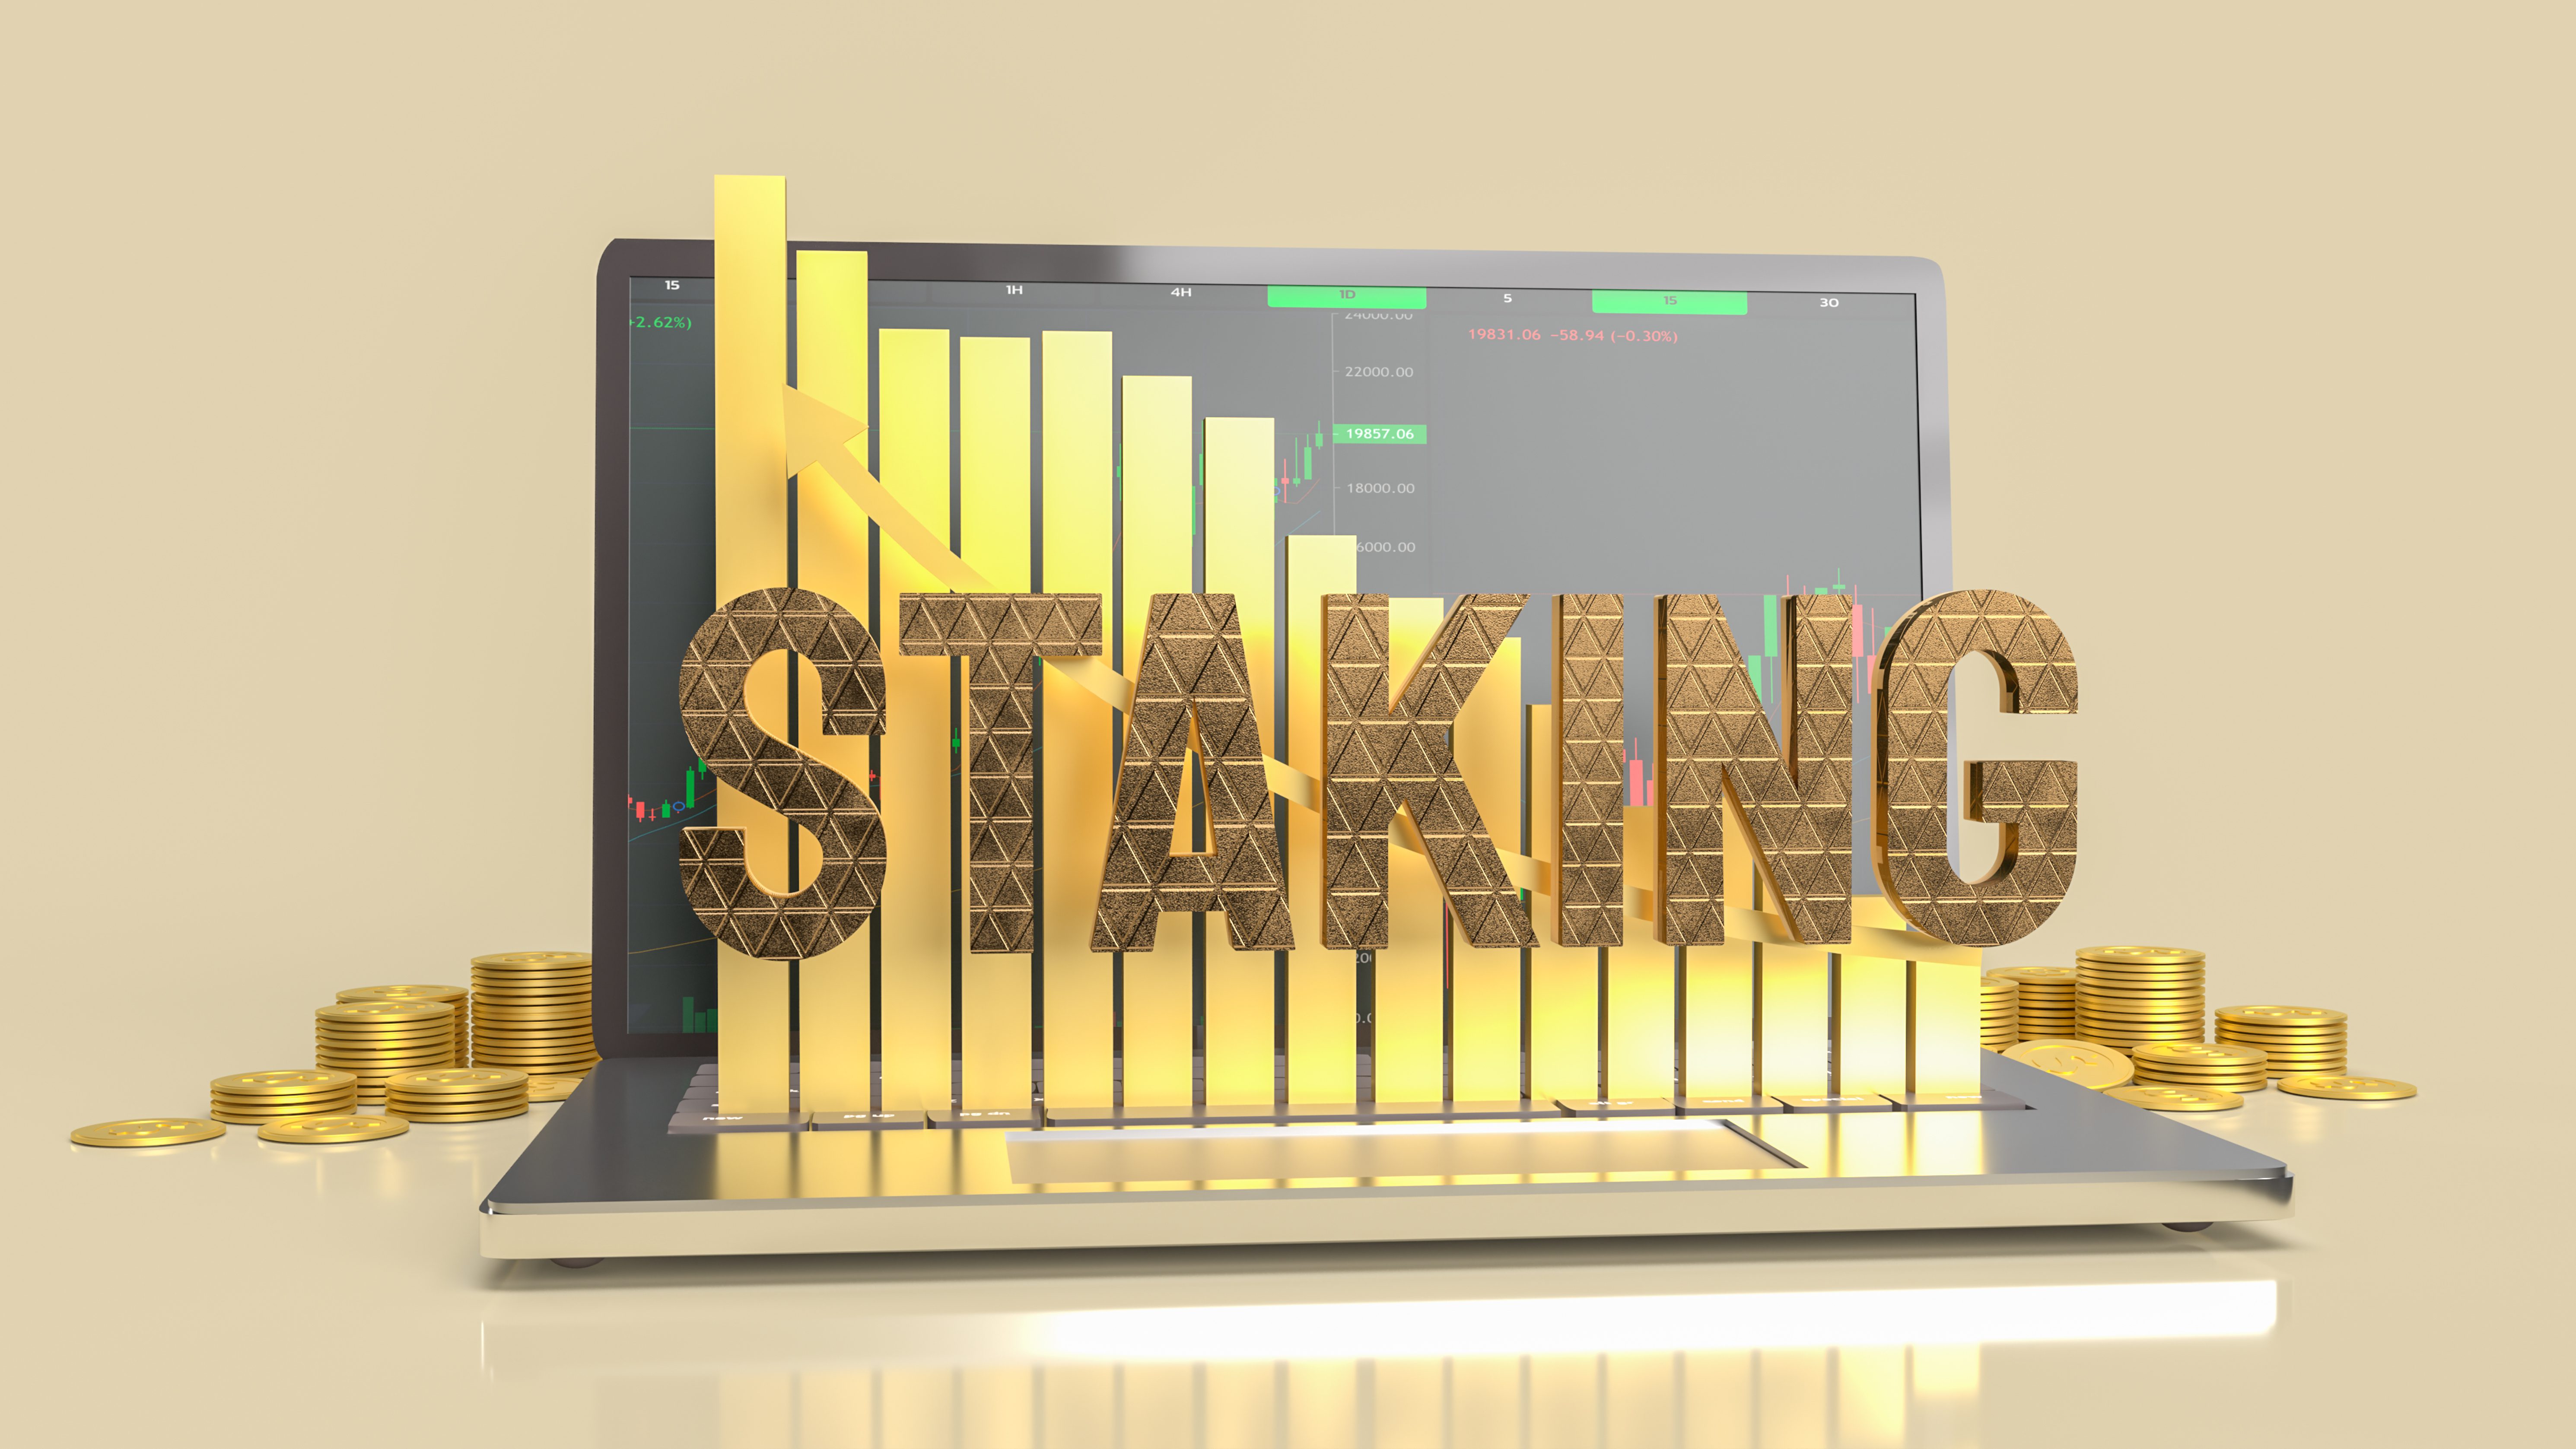 What's the difference between staking and DeFi staking?